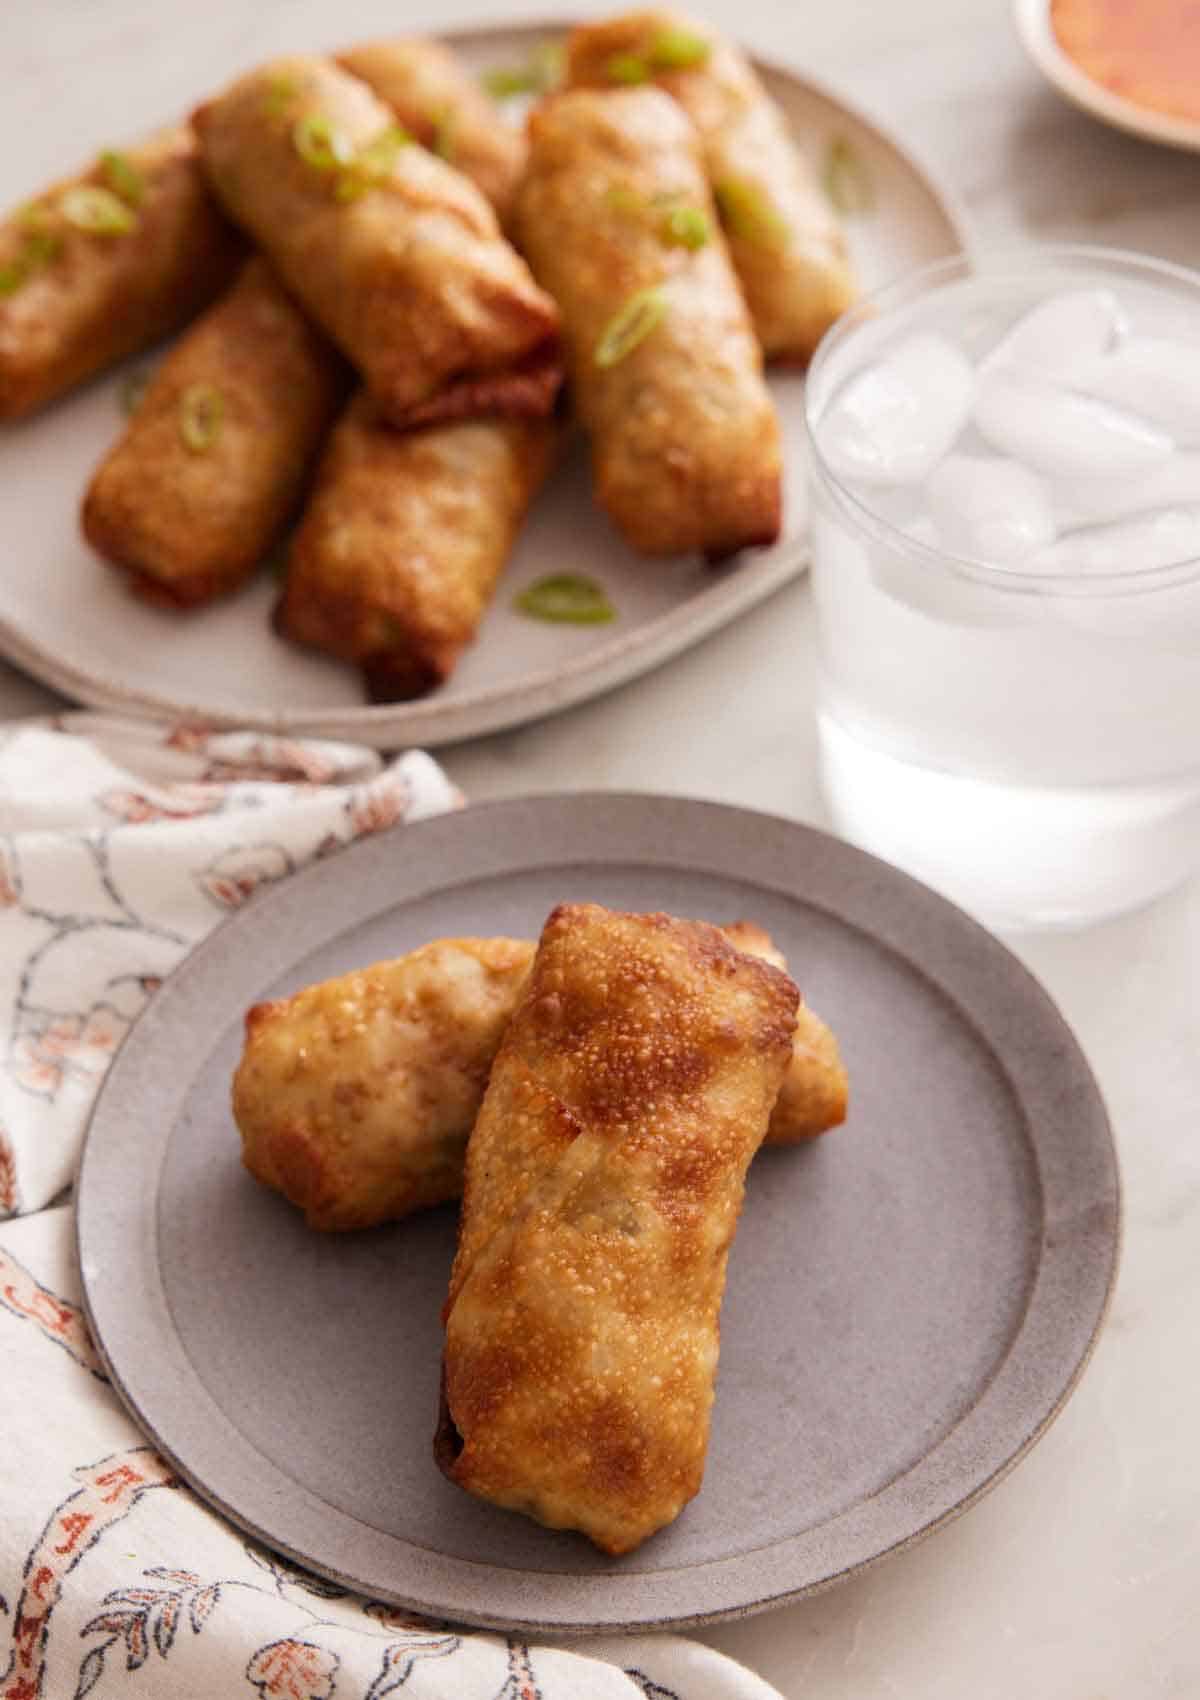 A plate with two air fryer egg rolls with a glass of ice water and platter with more rolls in the background.